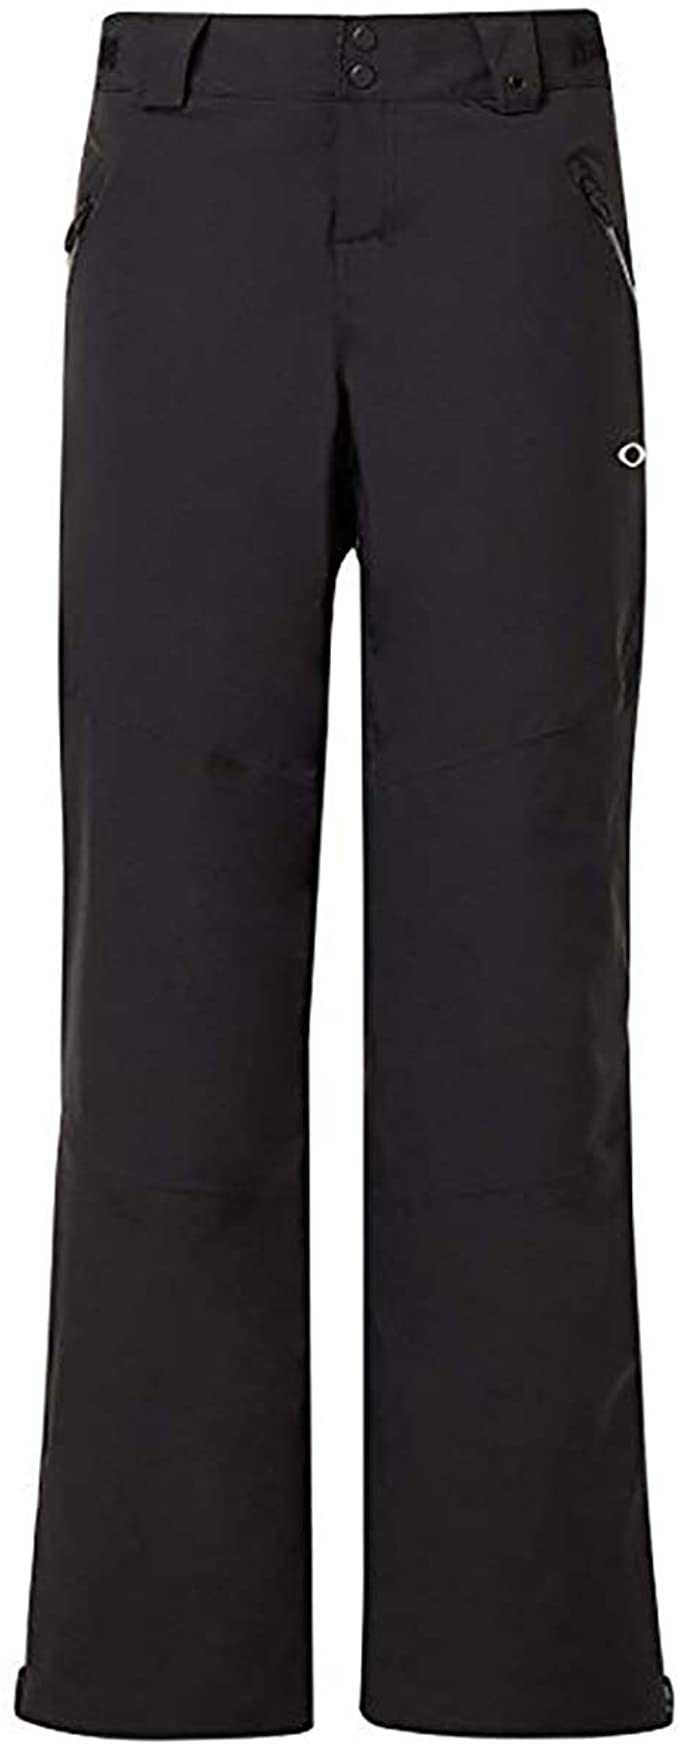 Oakley Moonshine Insulated 2L 10K Water Resistant Women Snow Ski Snowboard Pant